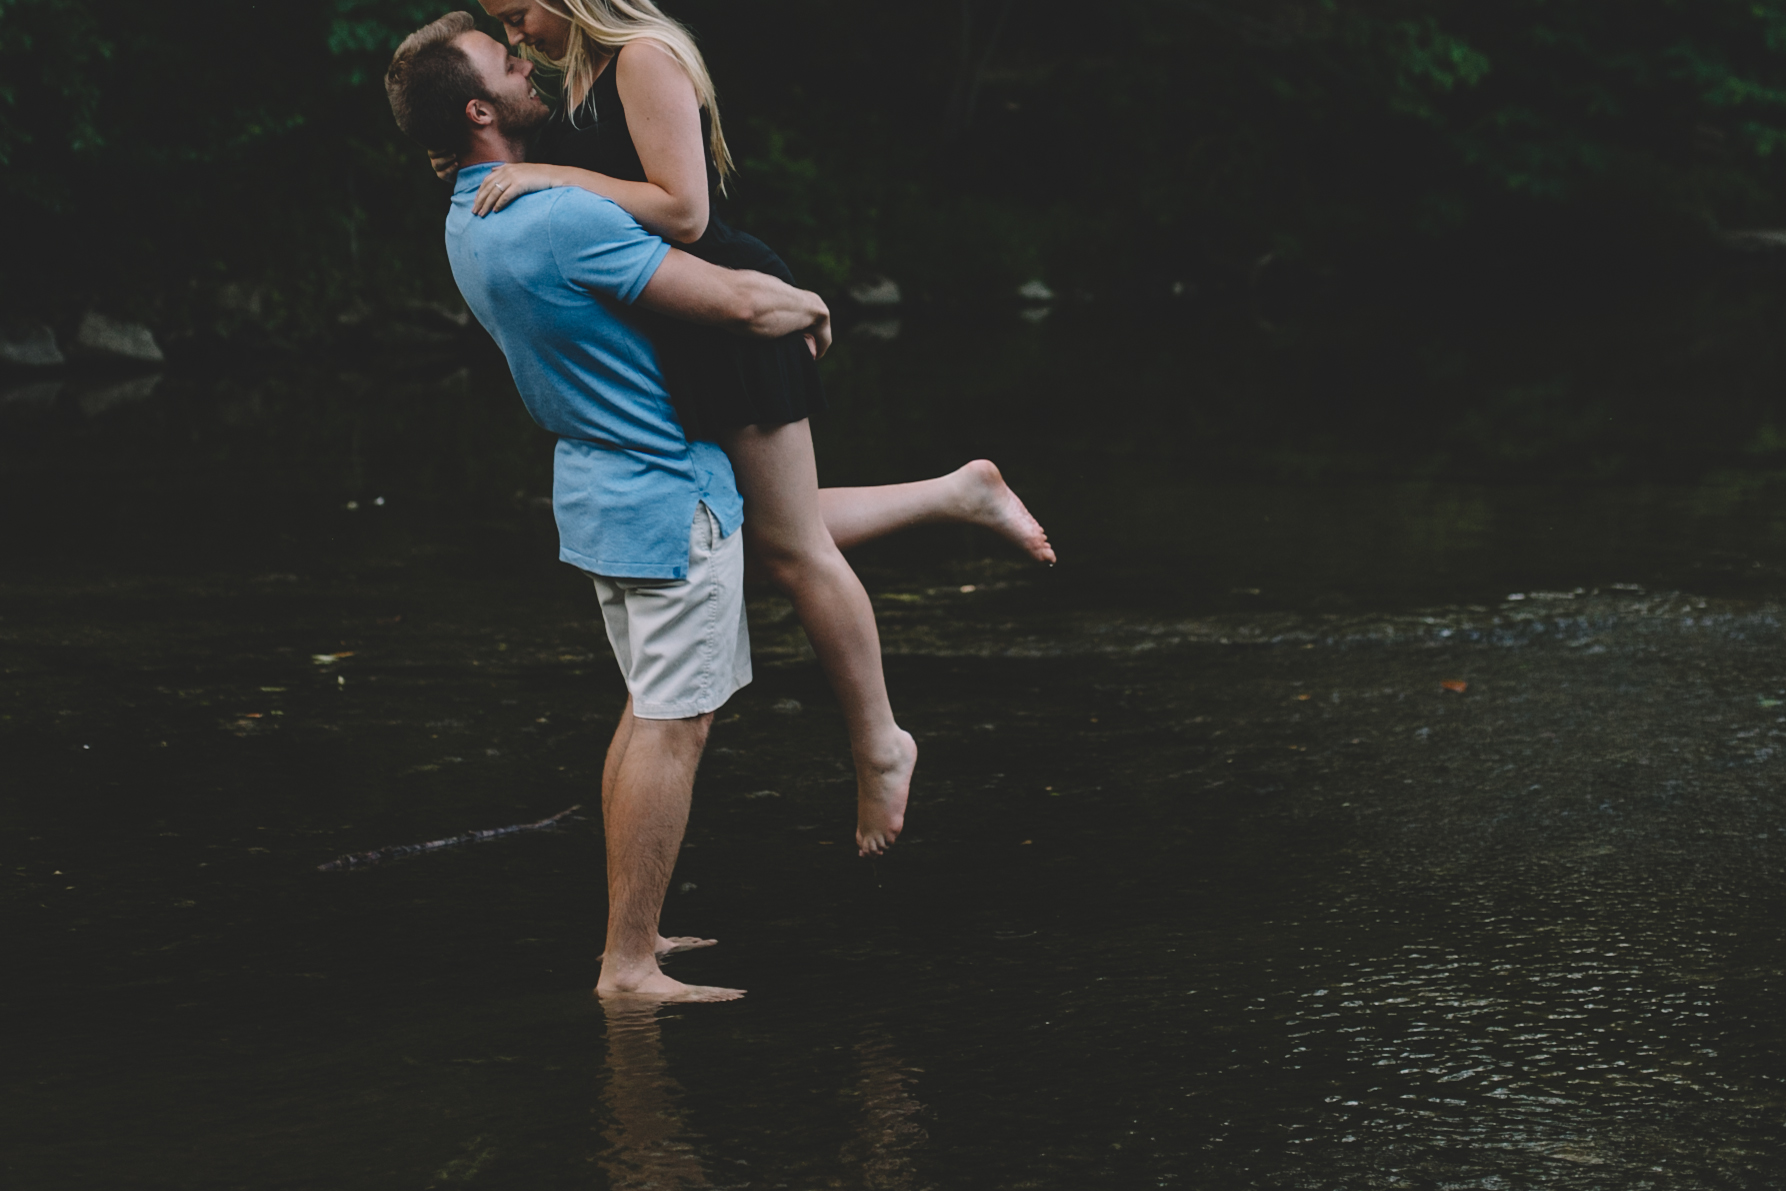 Elizabeth + Mitch Engagement Photo Session - Cherokee Park - Louisville, KY - Again We Say Rejoice Photography (120 of 163).jpg